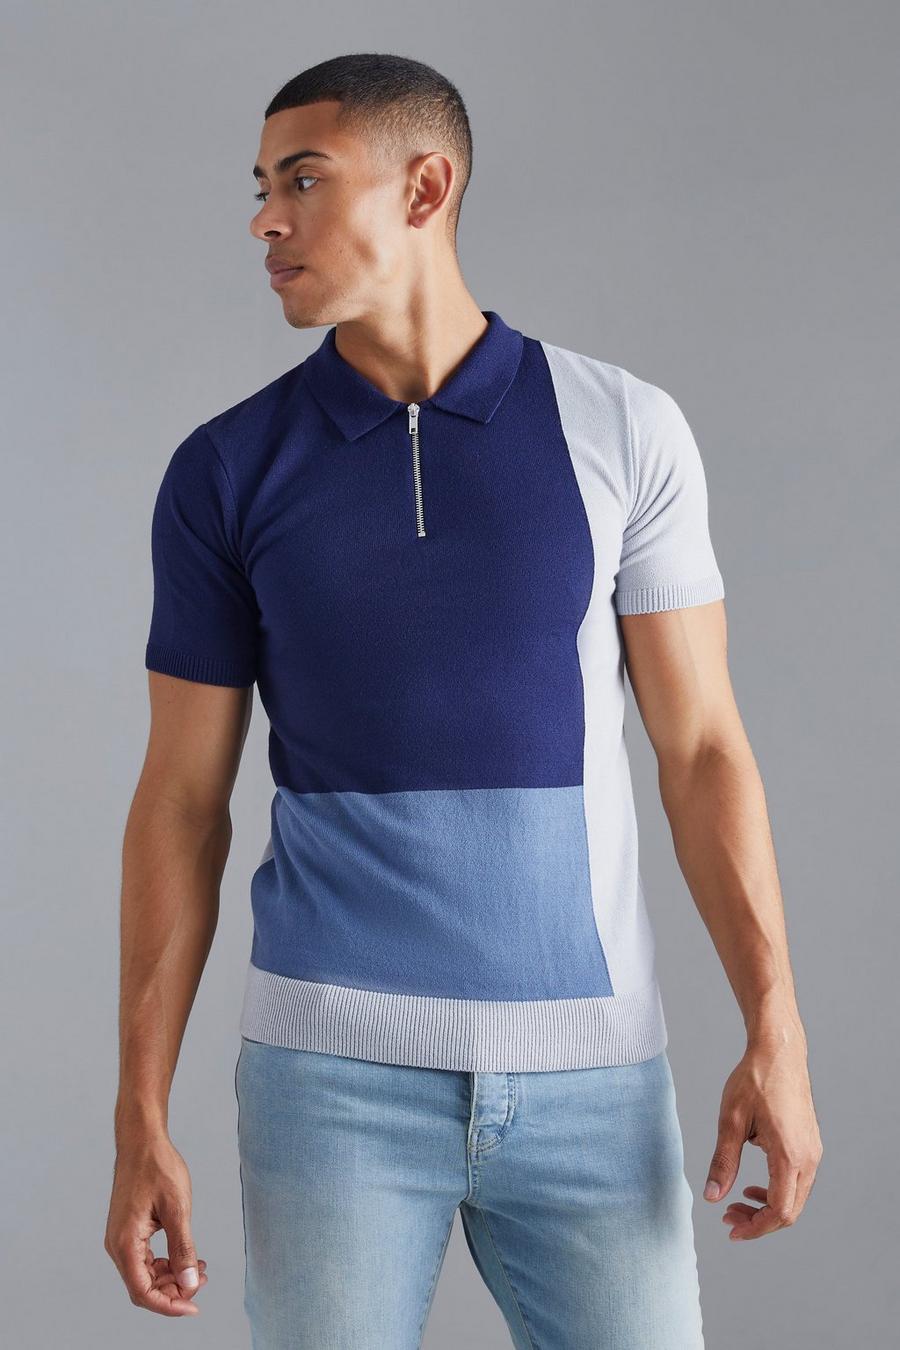 Muscle-Fit Colorblock Poloshirt, Navy image number 1